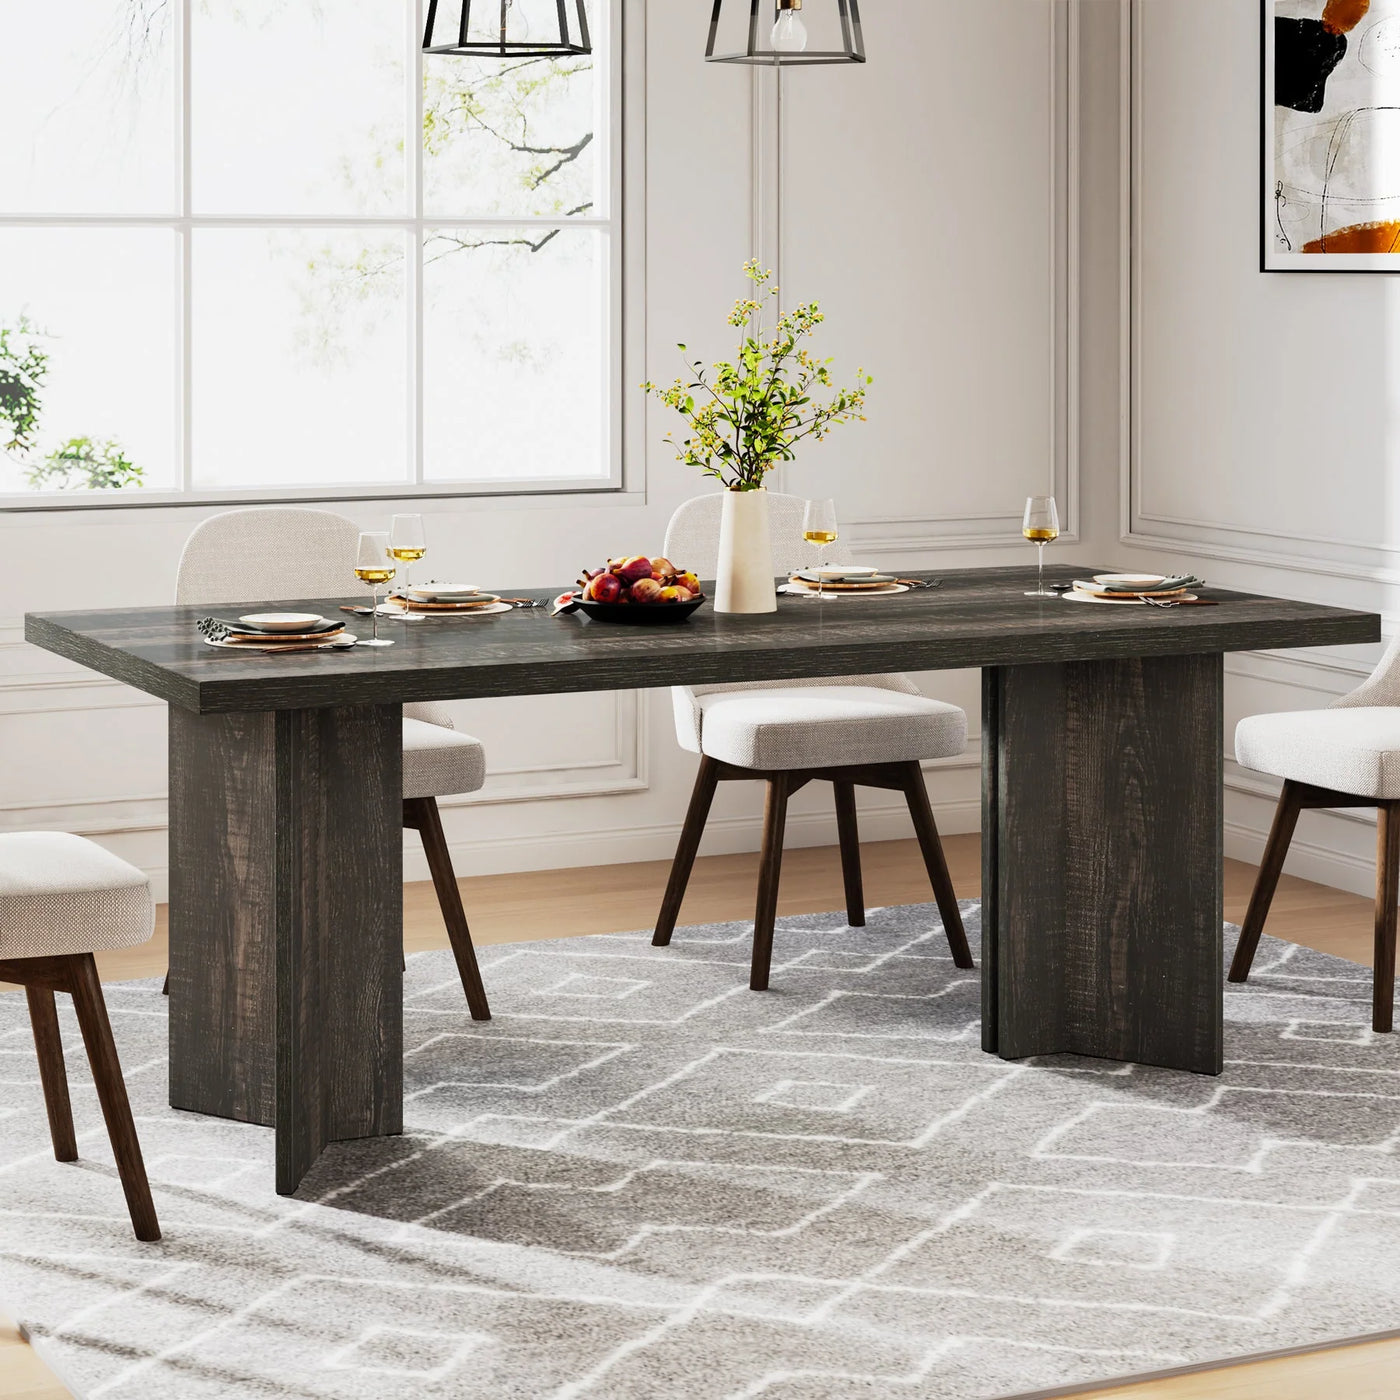 Mocha 63" Dining Table | Farmhouse Industrial Wooden Kitchen Table with Large Tabletop for 4-6